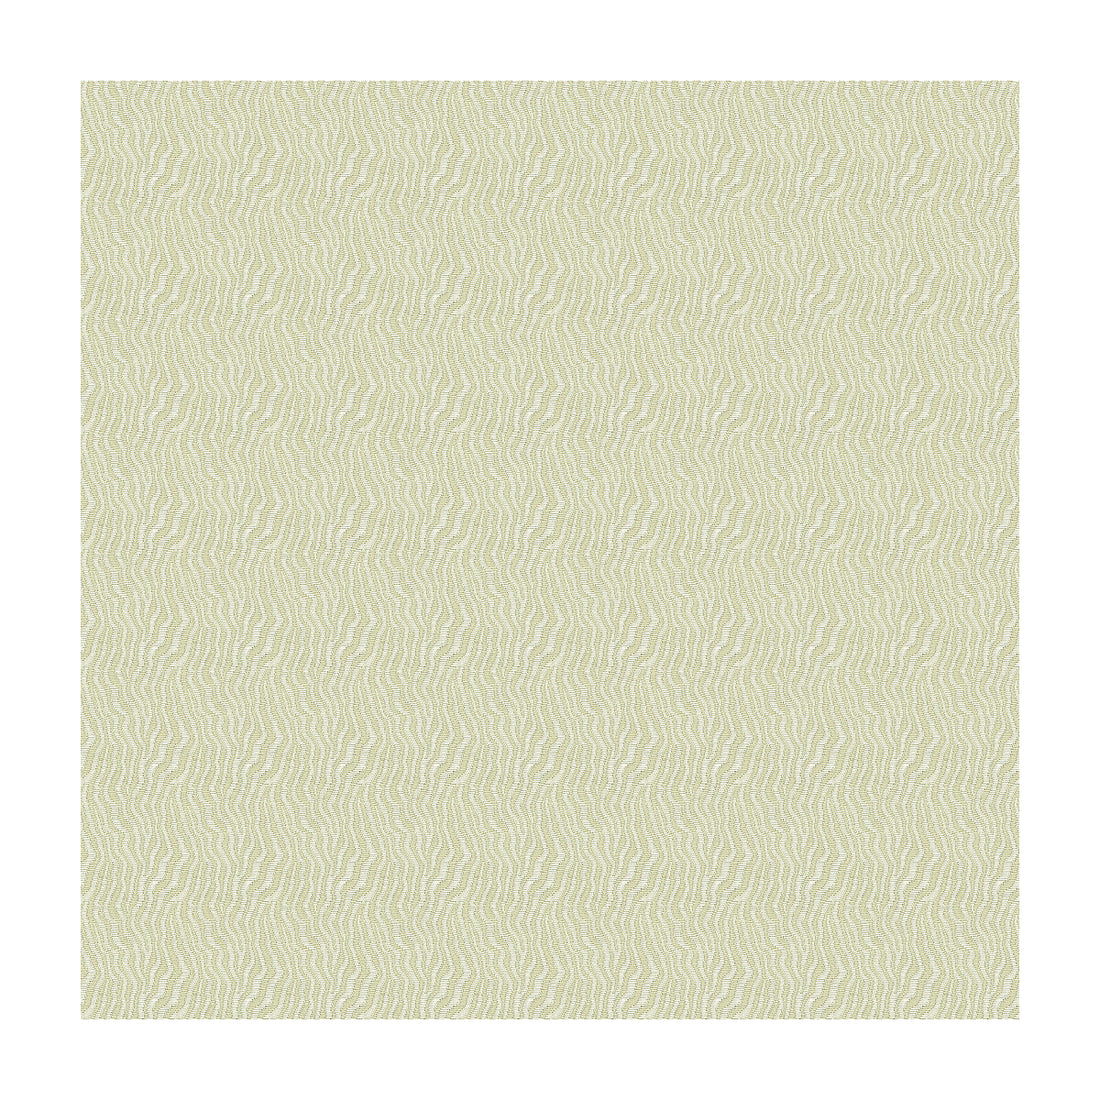 Jentry fabric in pearl color - pattern 32009.111.0 - by Kravet Design in the Candice Olson collection